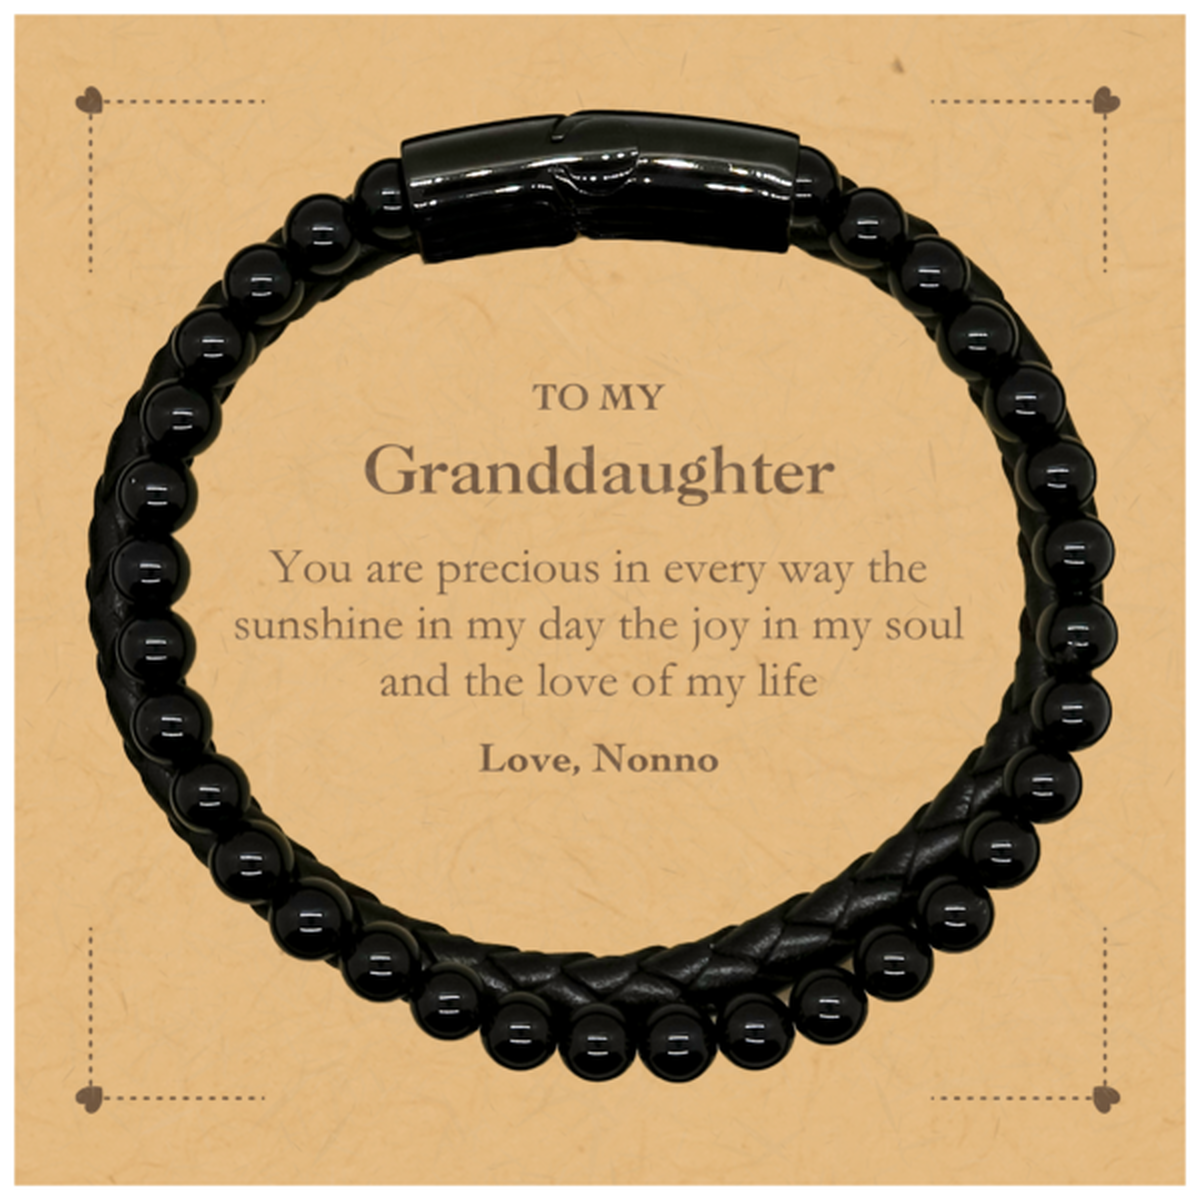 Graduation Gifts for Granddaughter Stone Leather Bracelets Present from Nonno, Christmas Granddaughter Birthday Gifts Granddaughter You are precious in every way the sunshine in my day. Love, Nonno